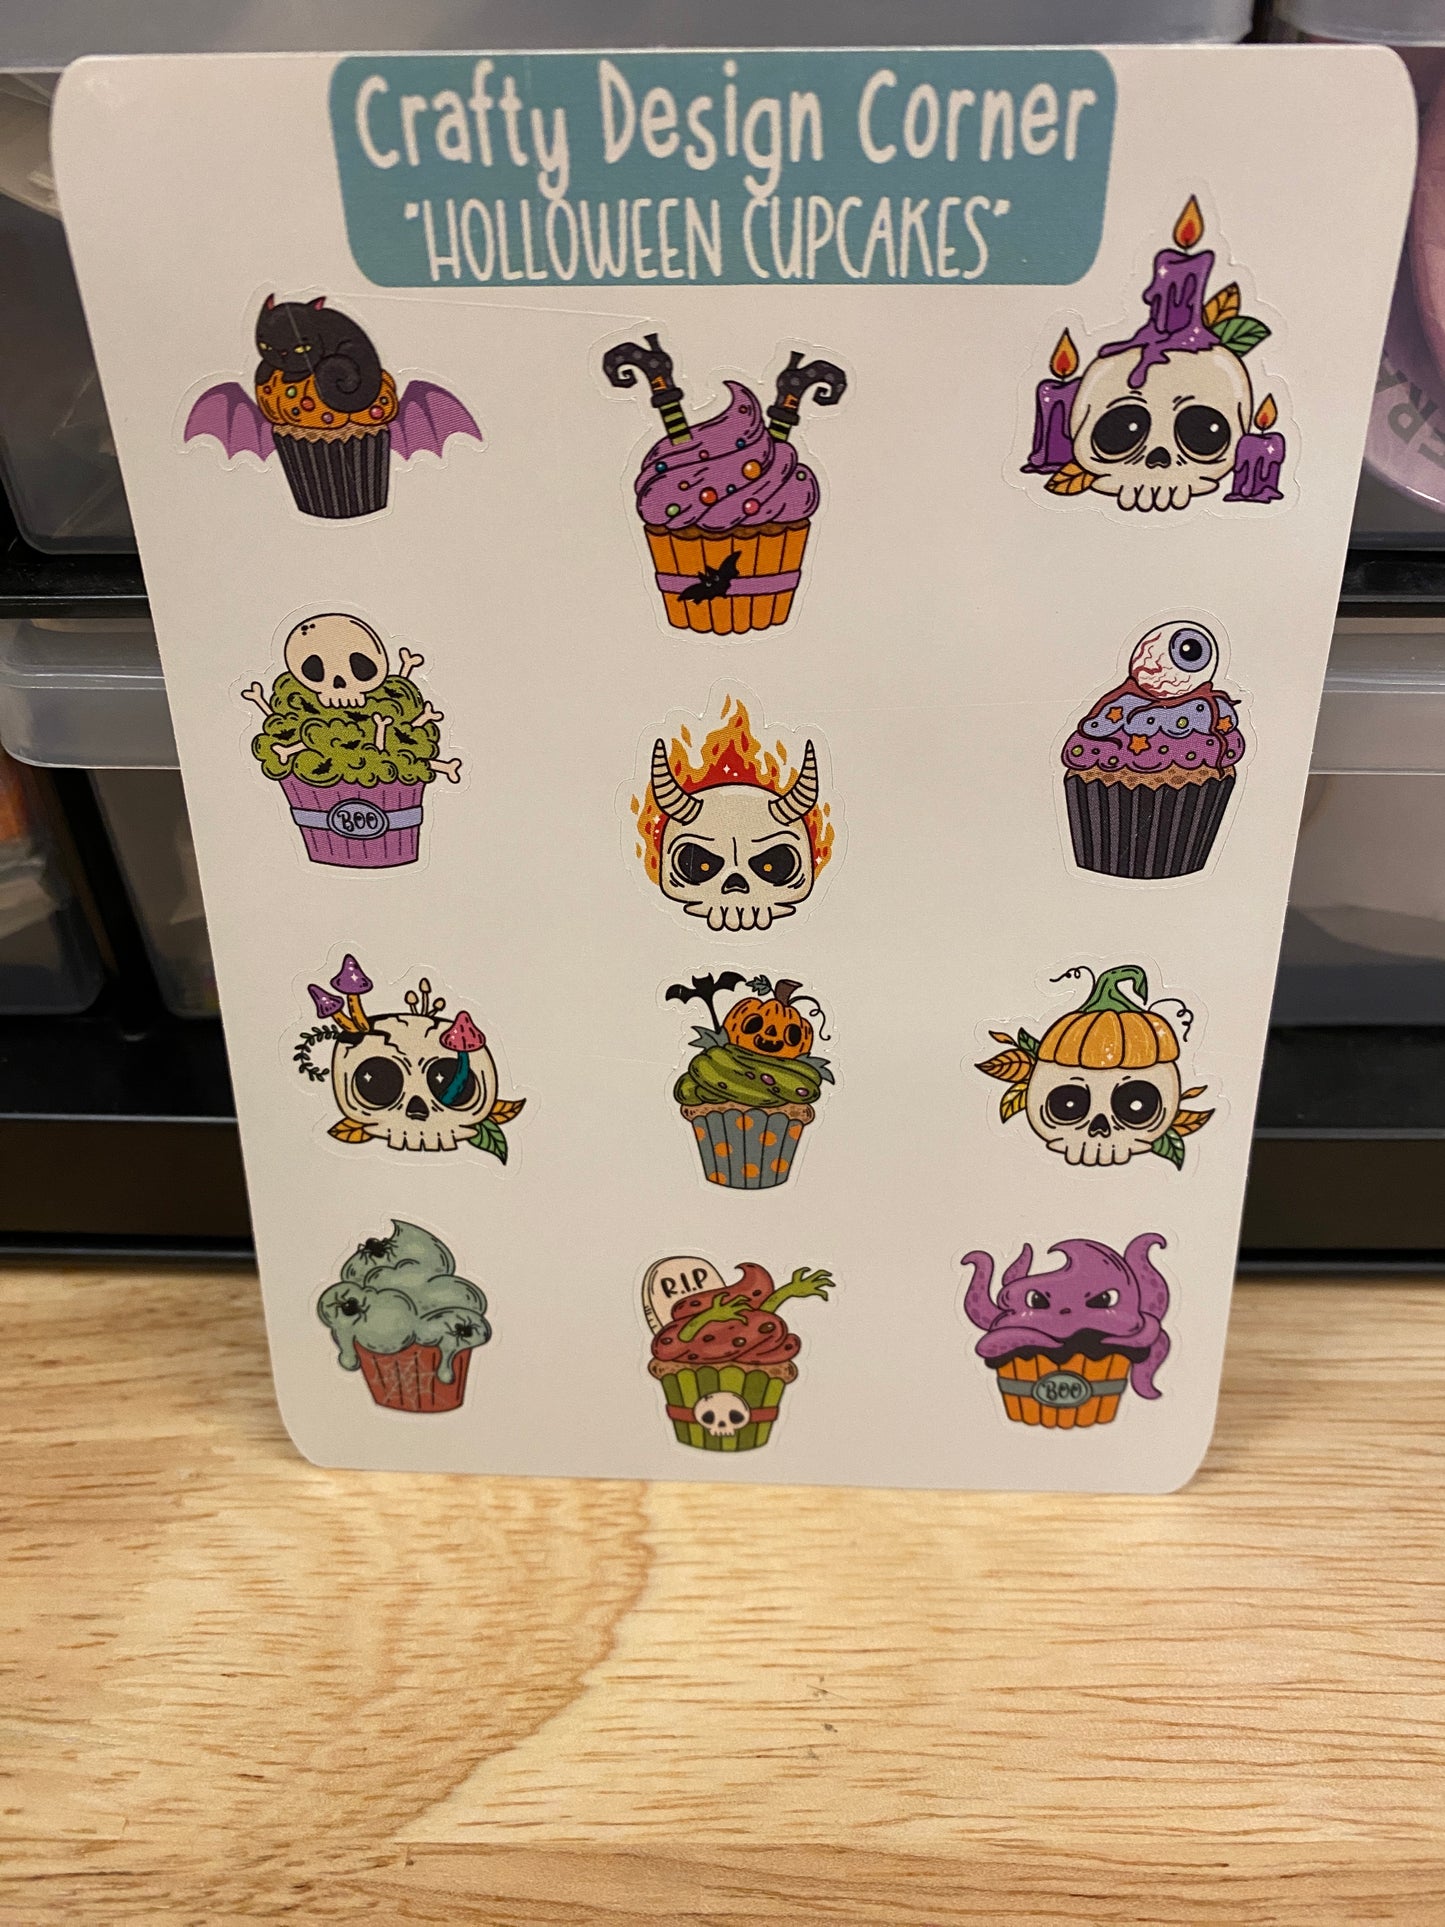 1" Holloween Cupcakes stickers, Cupcakes with Skulls sticker sheet, Matte Planner Sticker or Glossy Planner Sticker, Cute Cupcakes skulls